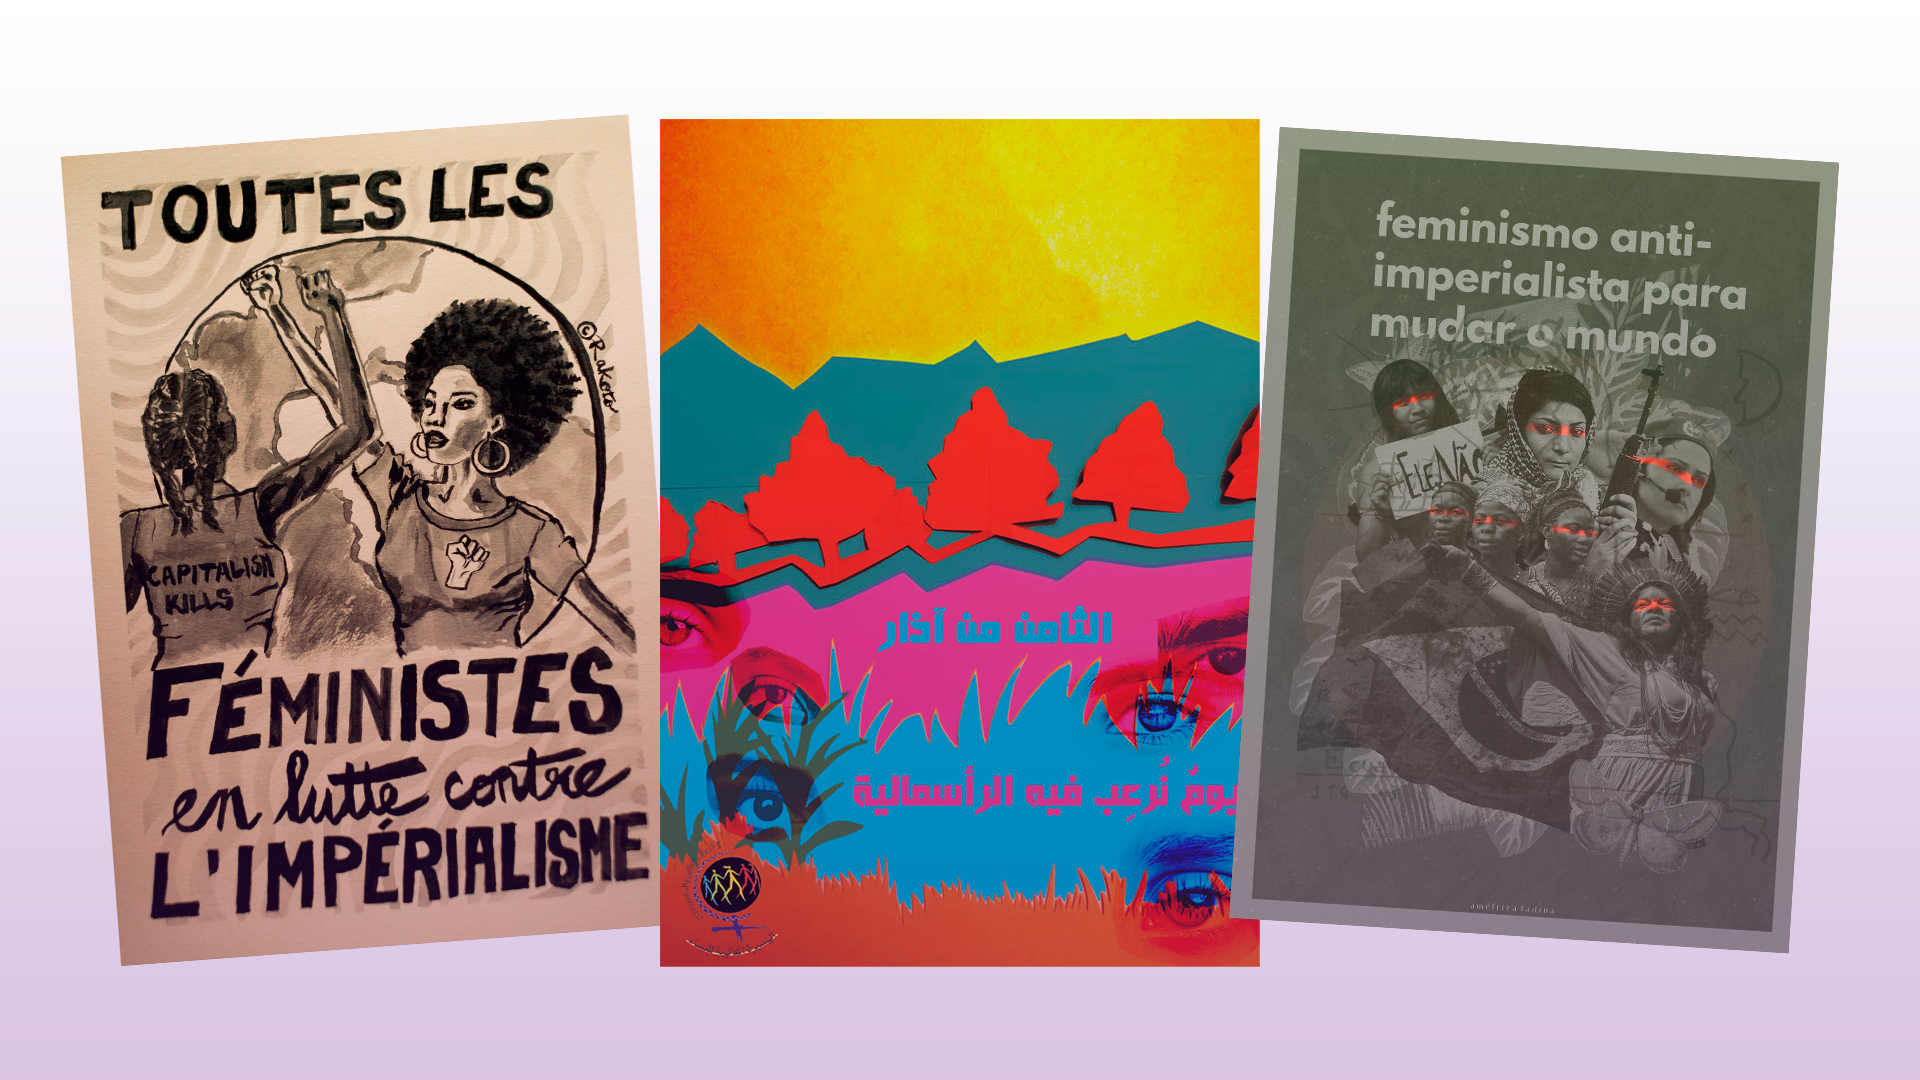 Poster Gallery: Anti-Imperialist Feminism To Change the World